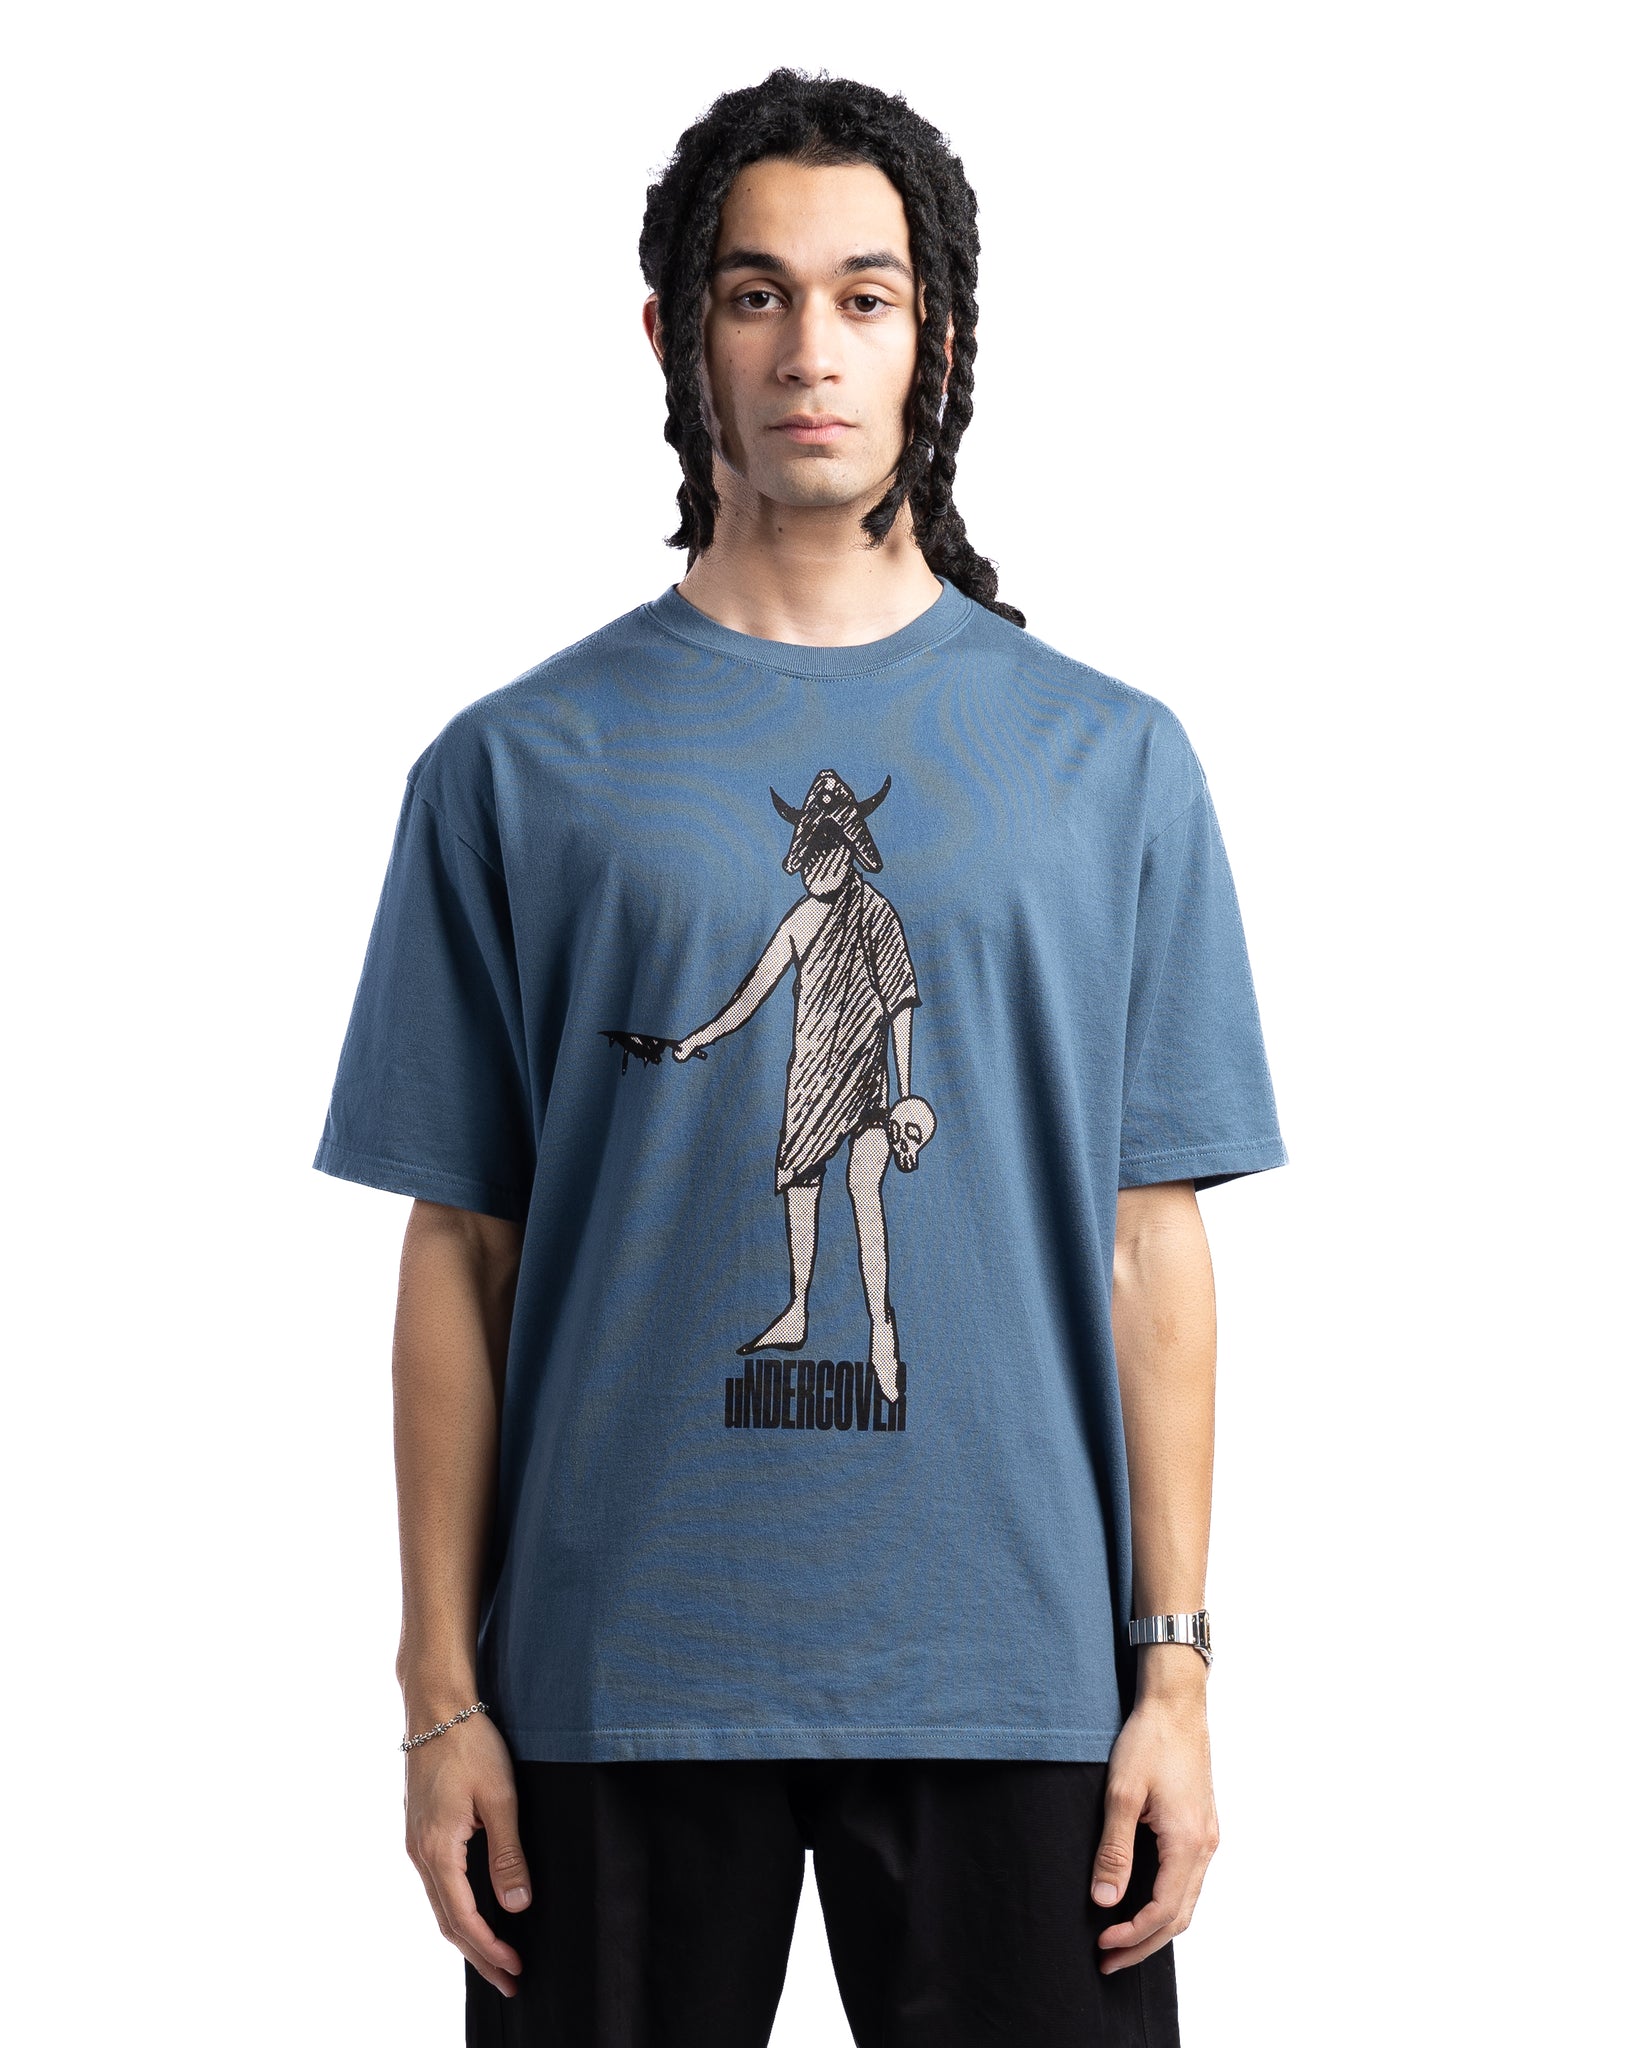 Undercover UC2C3808 Graphic Tee Grey Blue